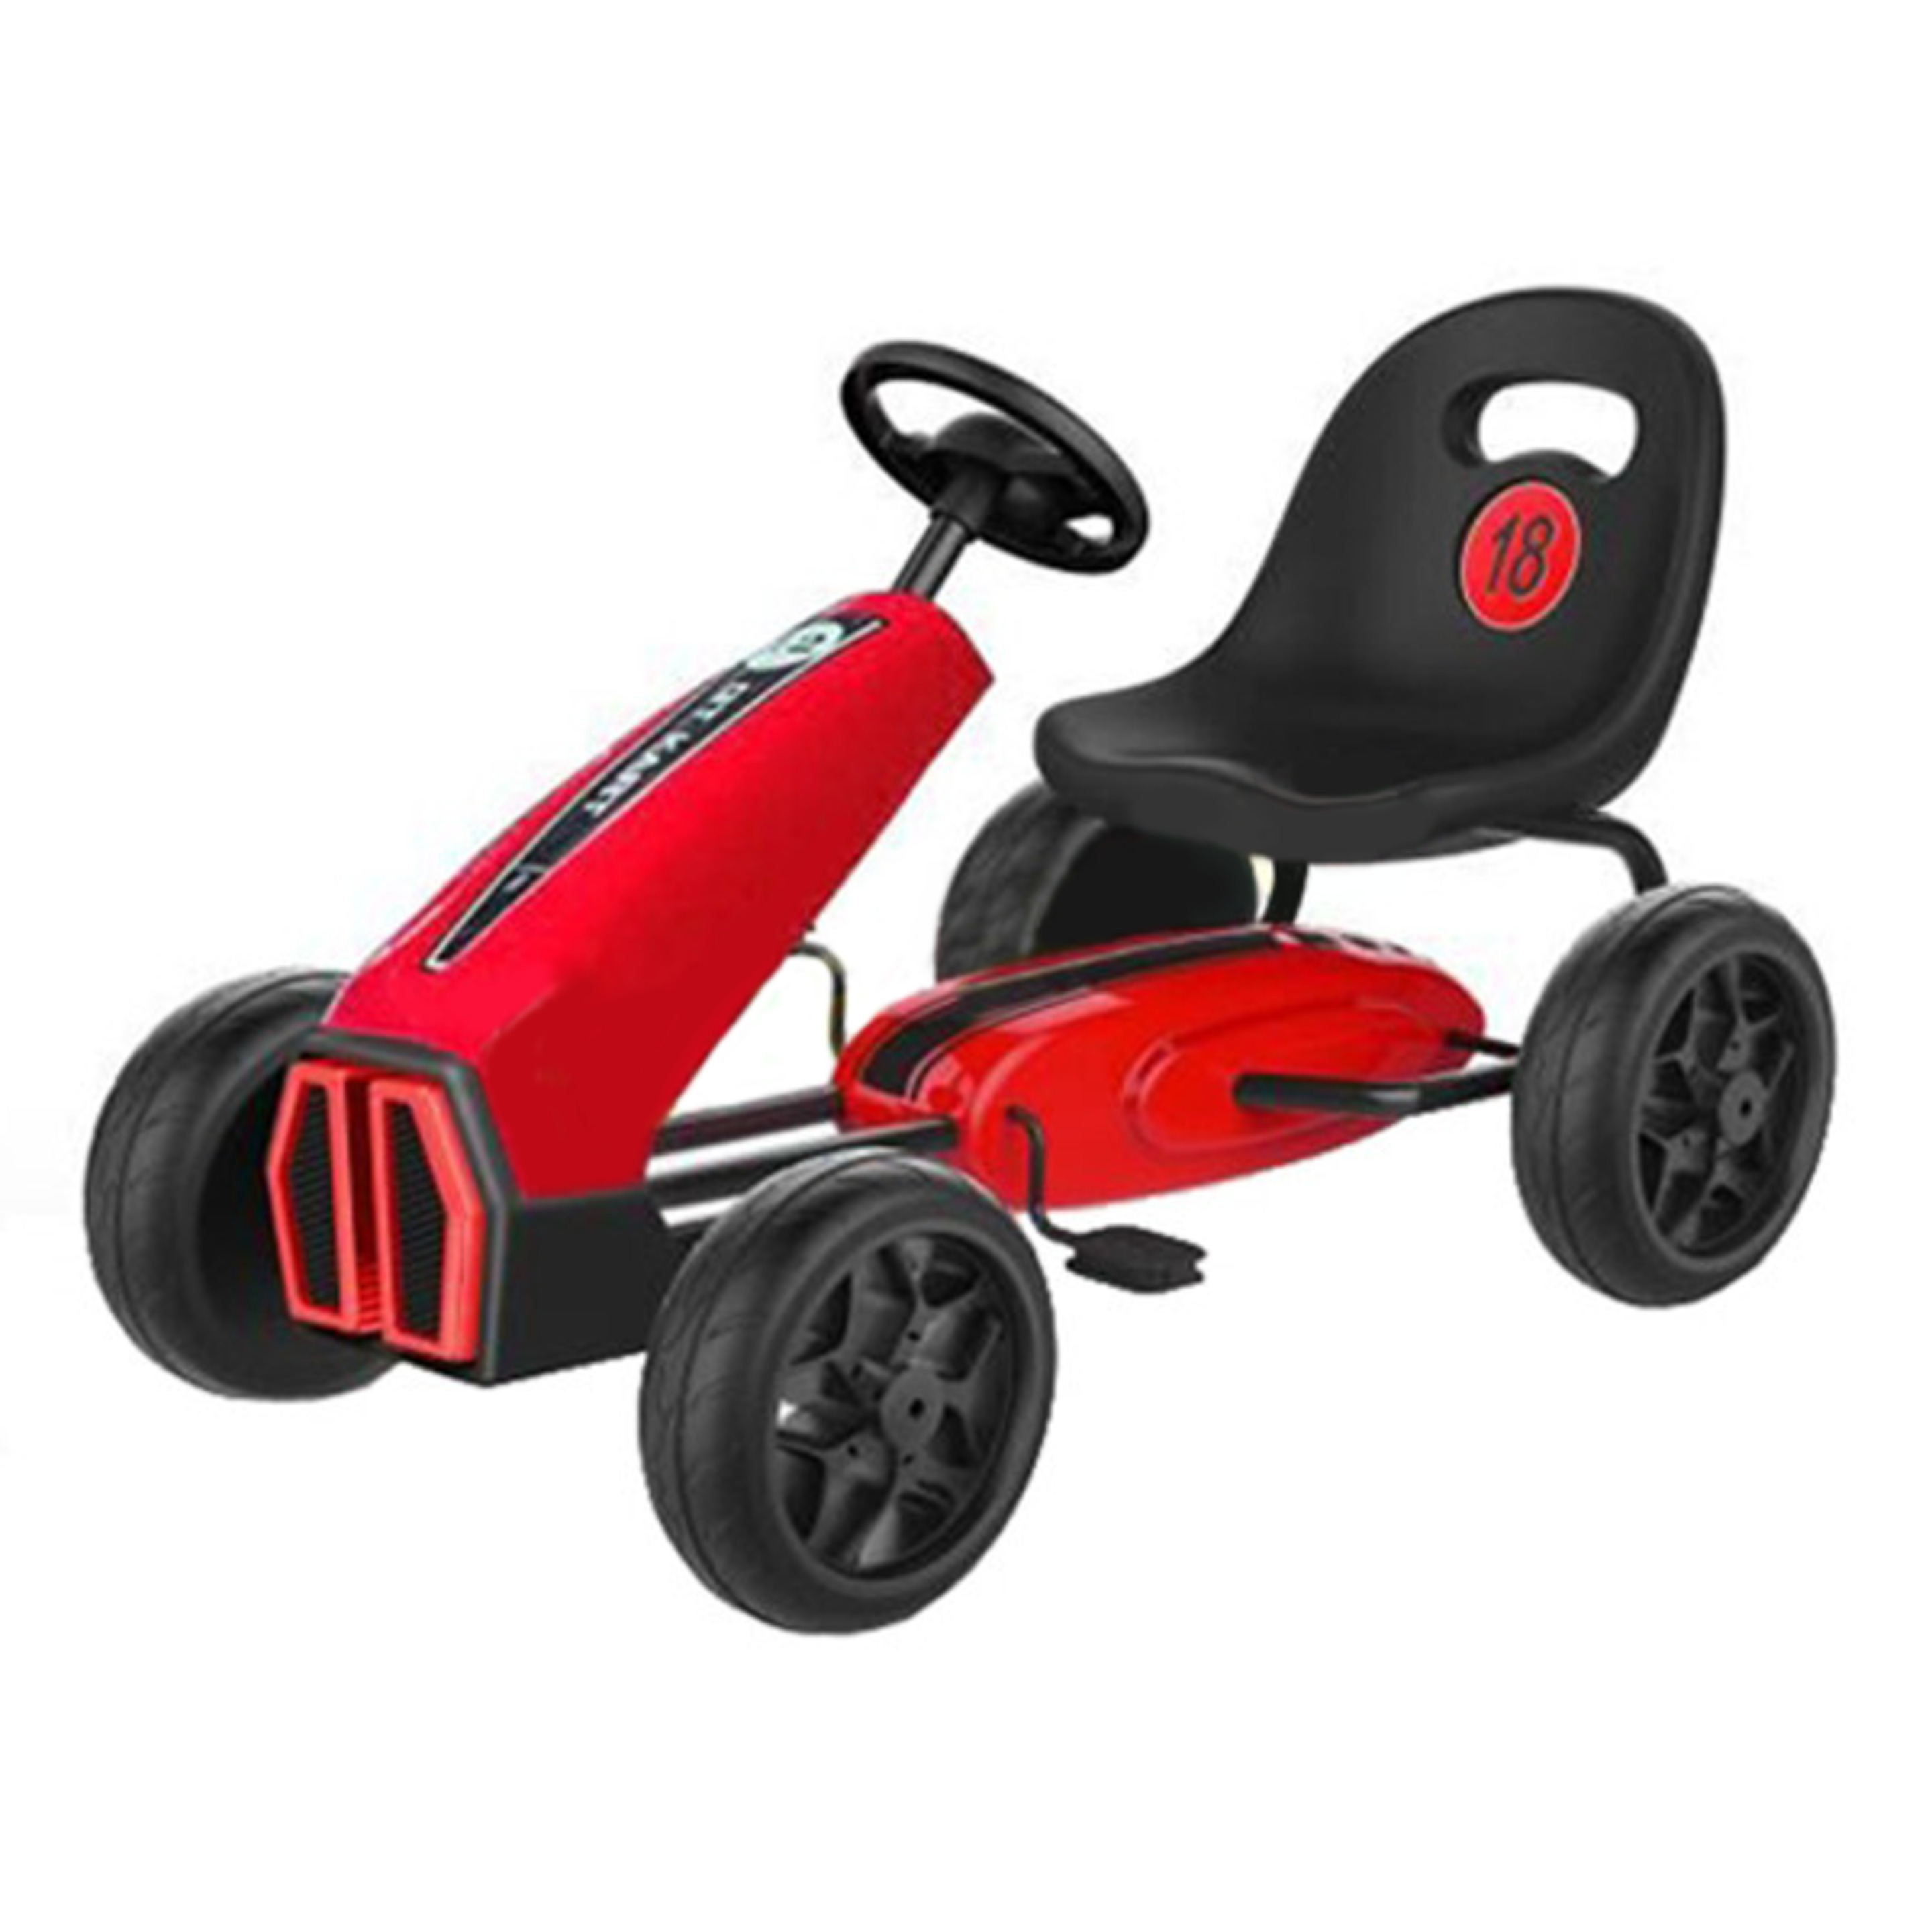 Kart De Pedales Bolid Red Edition - rojo - 